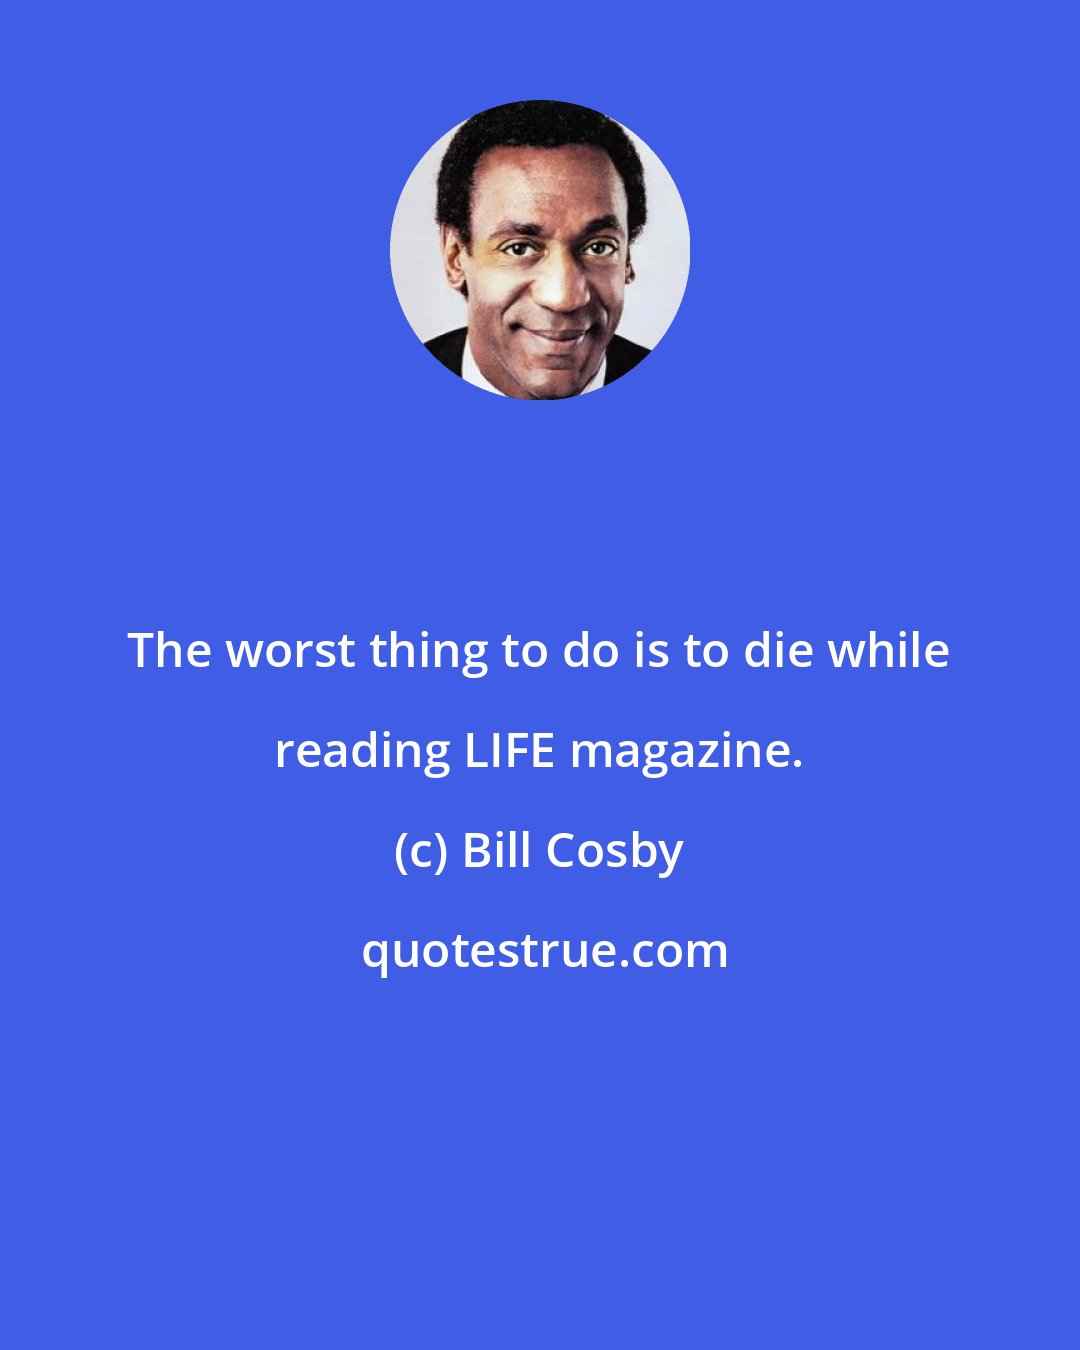 Bill Cosby: The worst thing to do is to die while reading LIFE magazine.